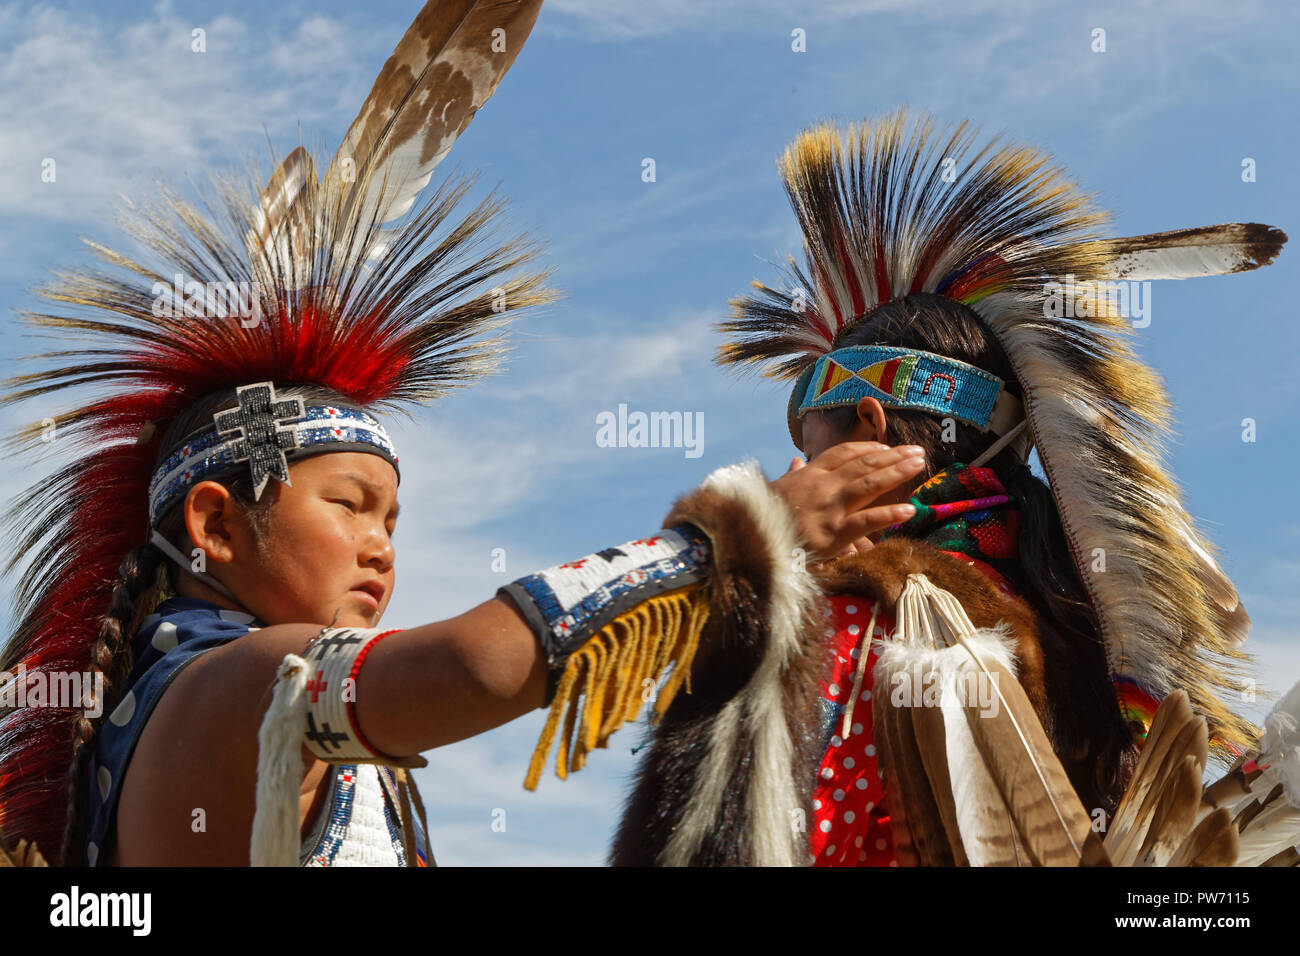 BISMARK, NORTH DAKOTA, September 8, 2018 : 49th annual United Tribes Pow Wow, one of largest outdoor event, gathers in Bismark more than 900 dancers a Stock Photo